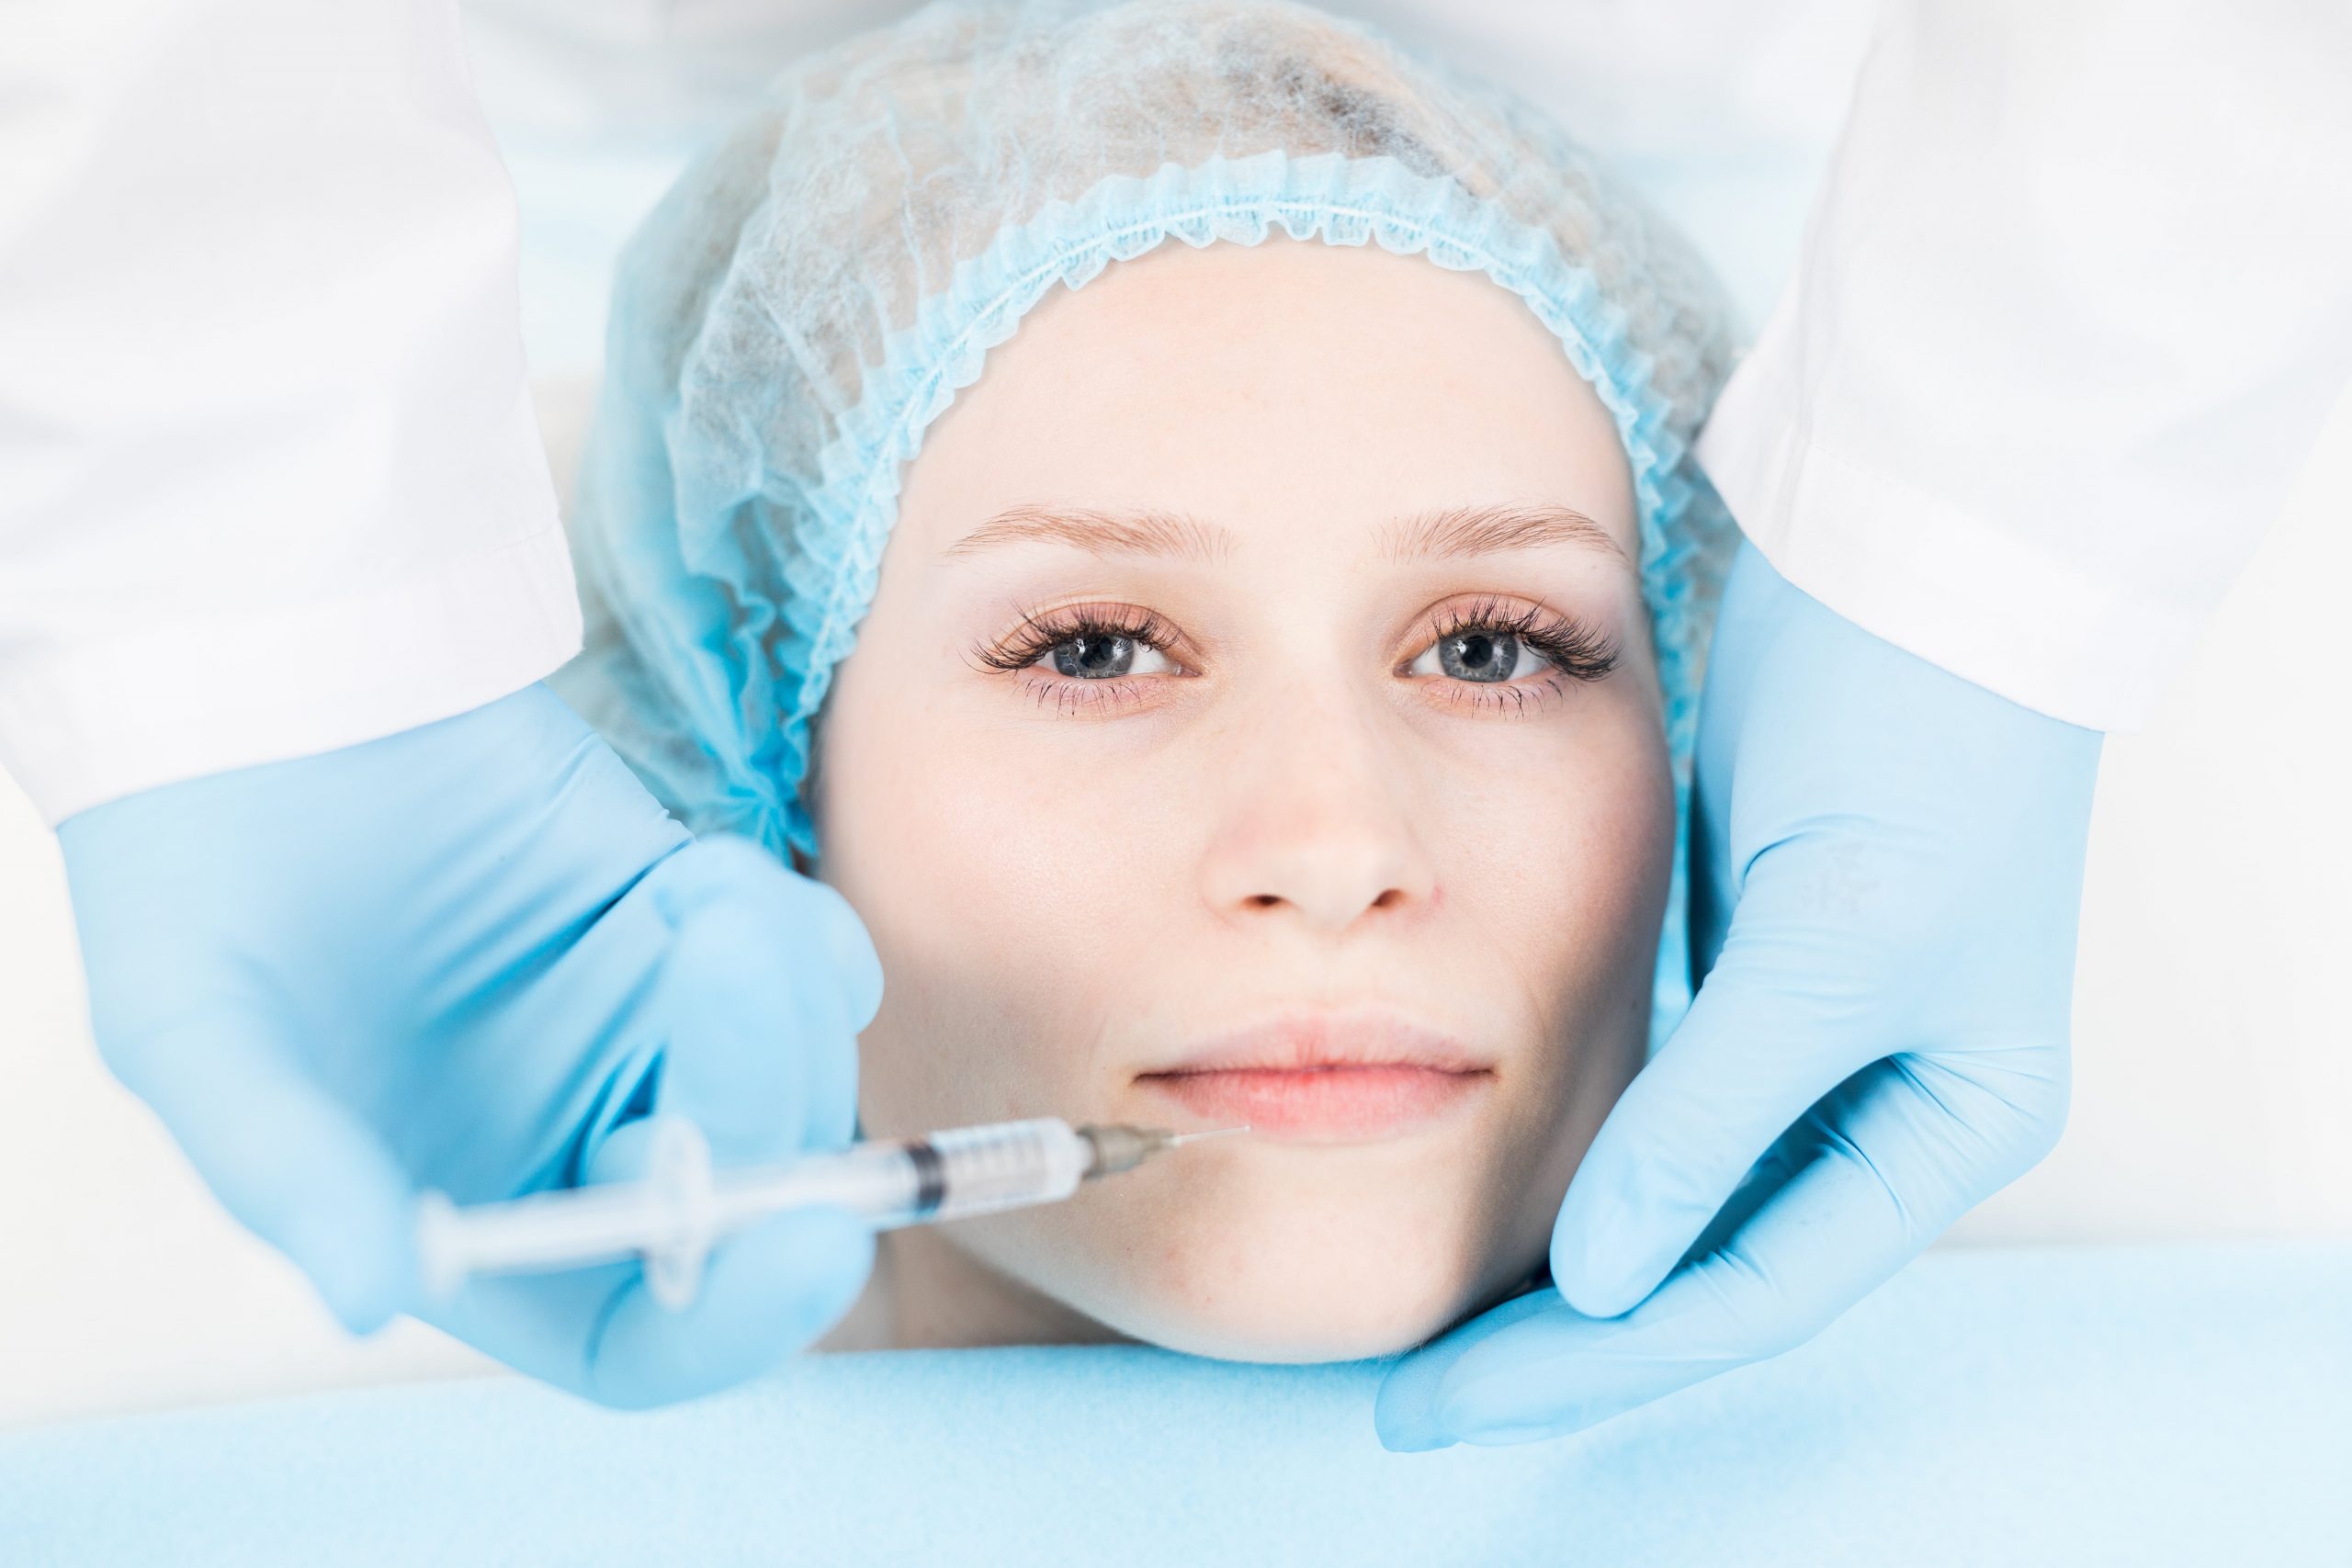 Young woman looking at camera while having lip filler injection in beauty spa